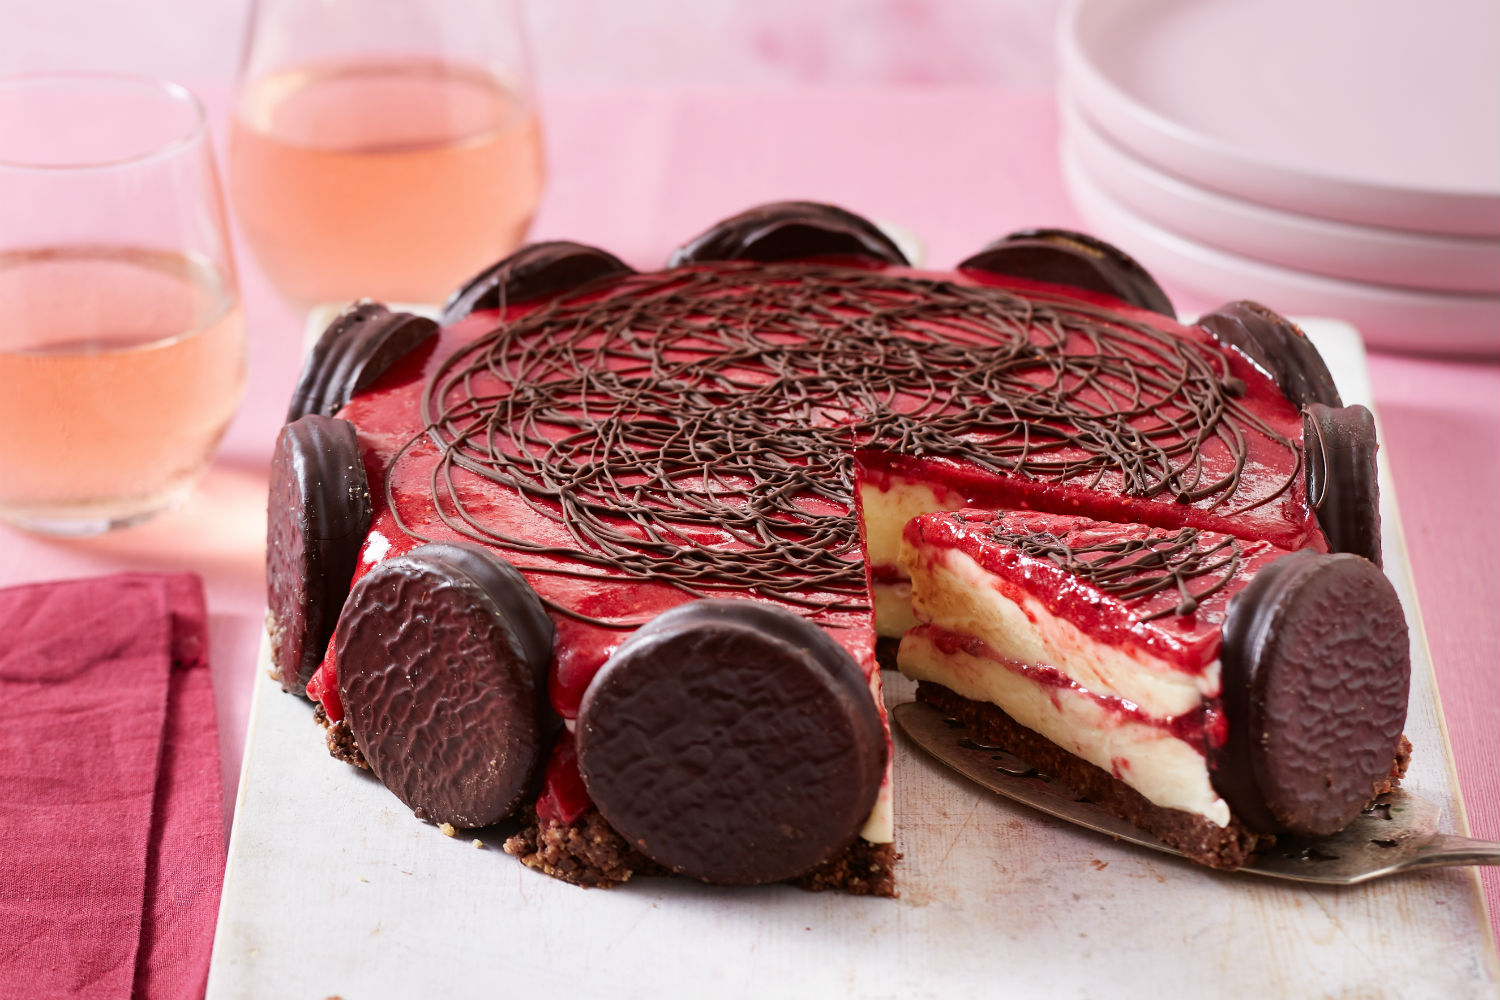 This Wagon Wheel Cheesecake recipe is perfect for any occassion